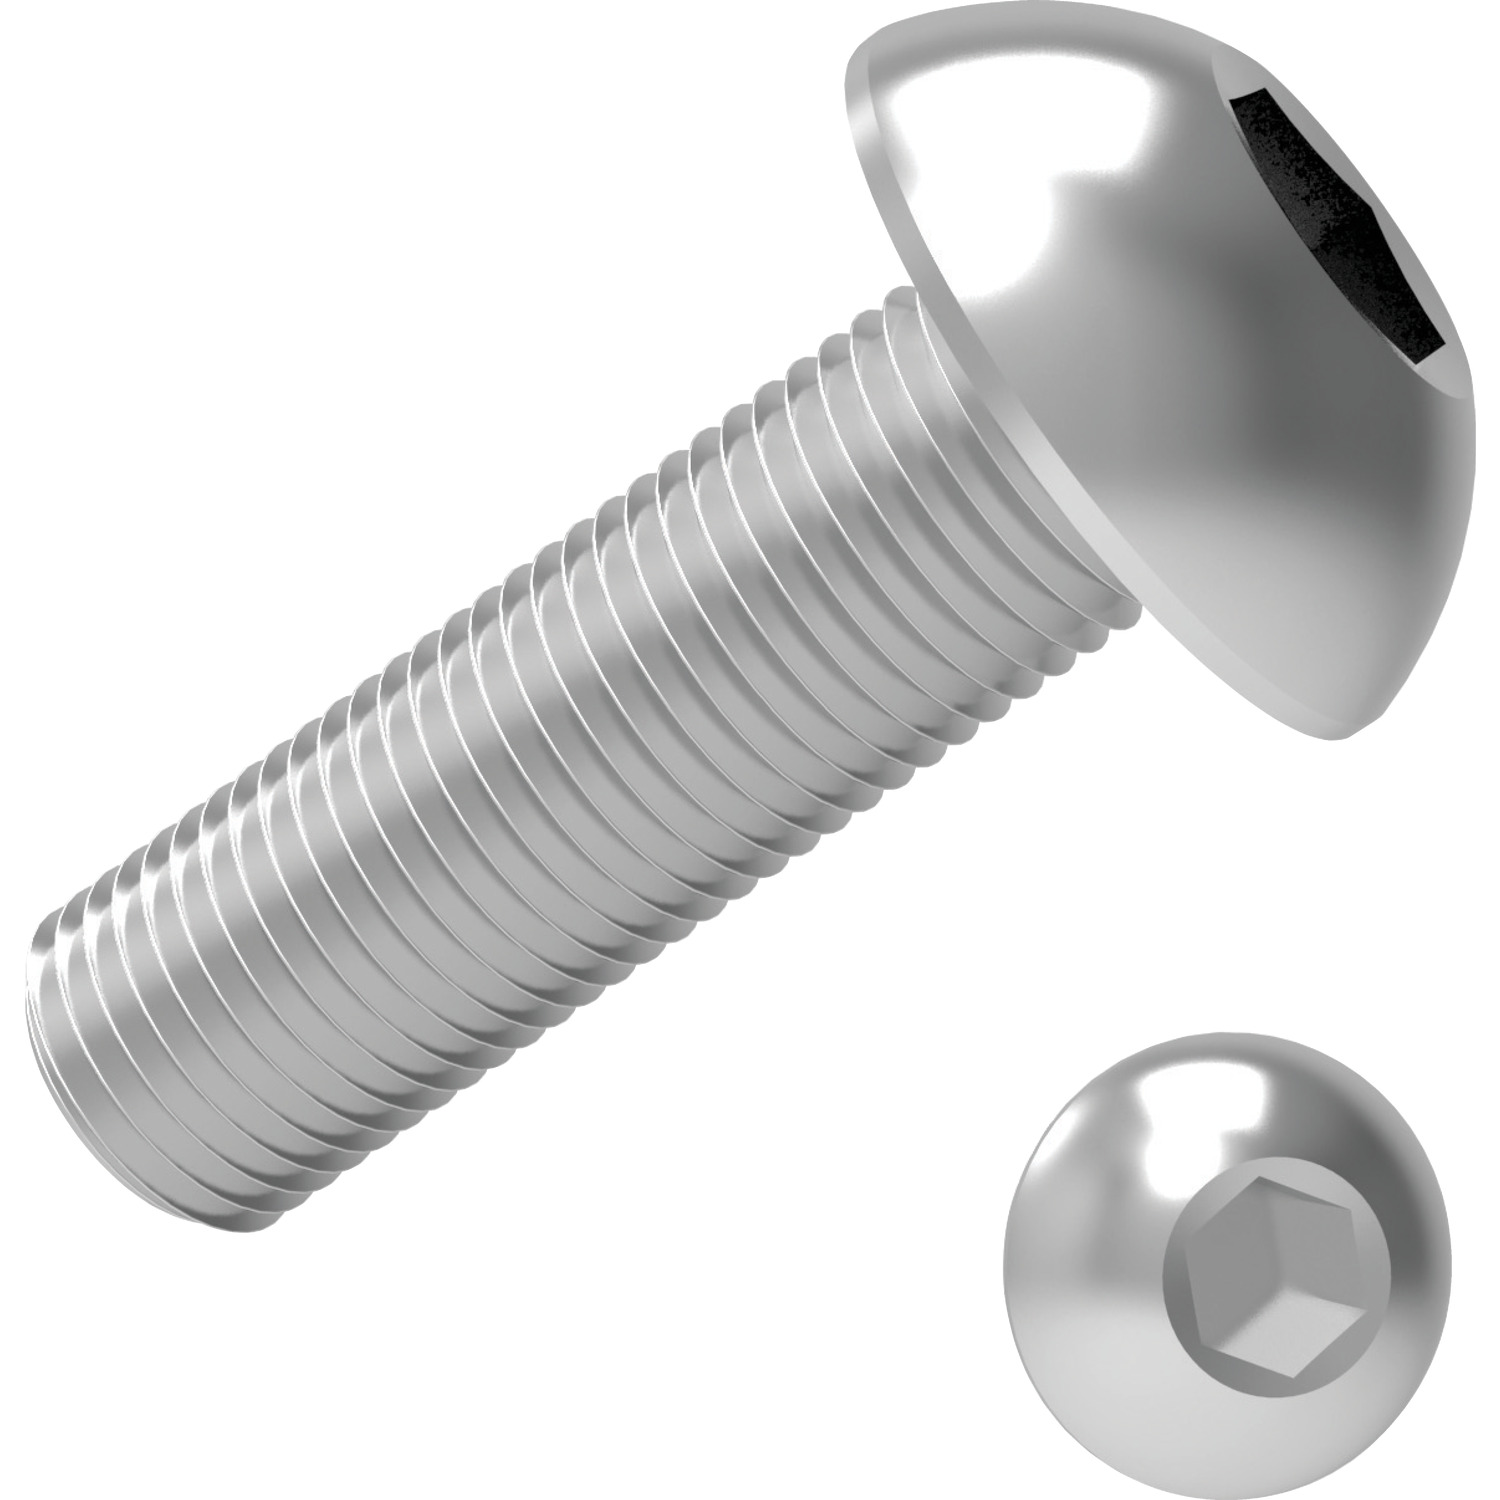 Titanium Socket Button Screws Socket button screws in ASTM B348 grade 2 titanium to meet ISO 7380. Also available with TX (hexalobular) drive. Manufactured in grade 5 titanium on request. A vented version of this product in titanium can be produced on request - excellent for ultra-high vacuum applications. Enquire now.